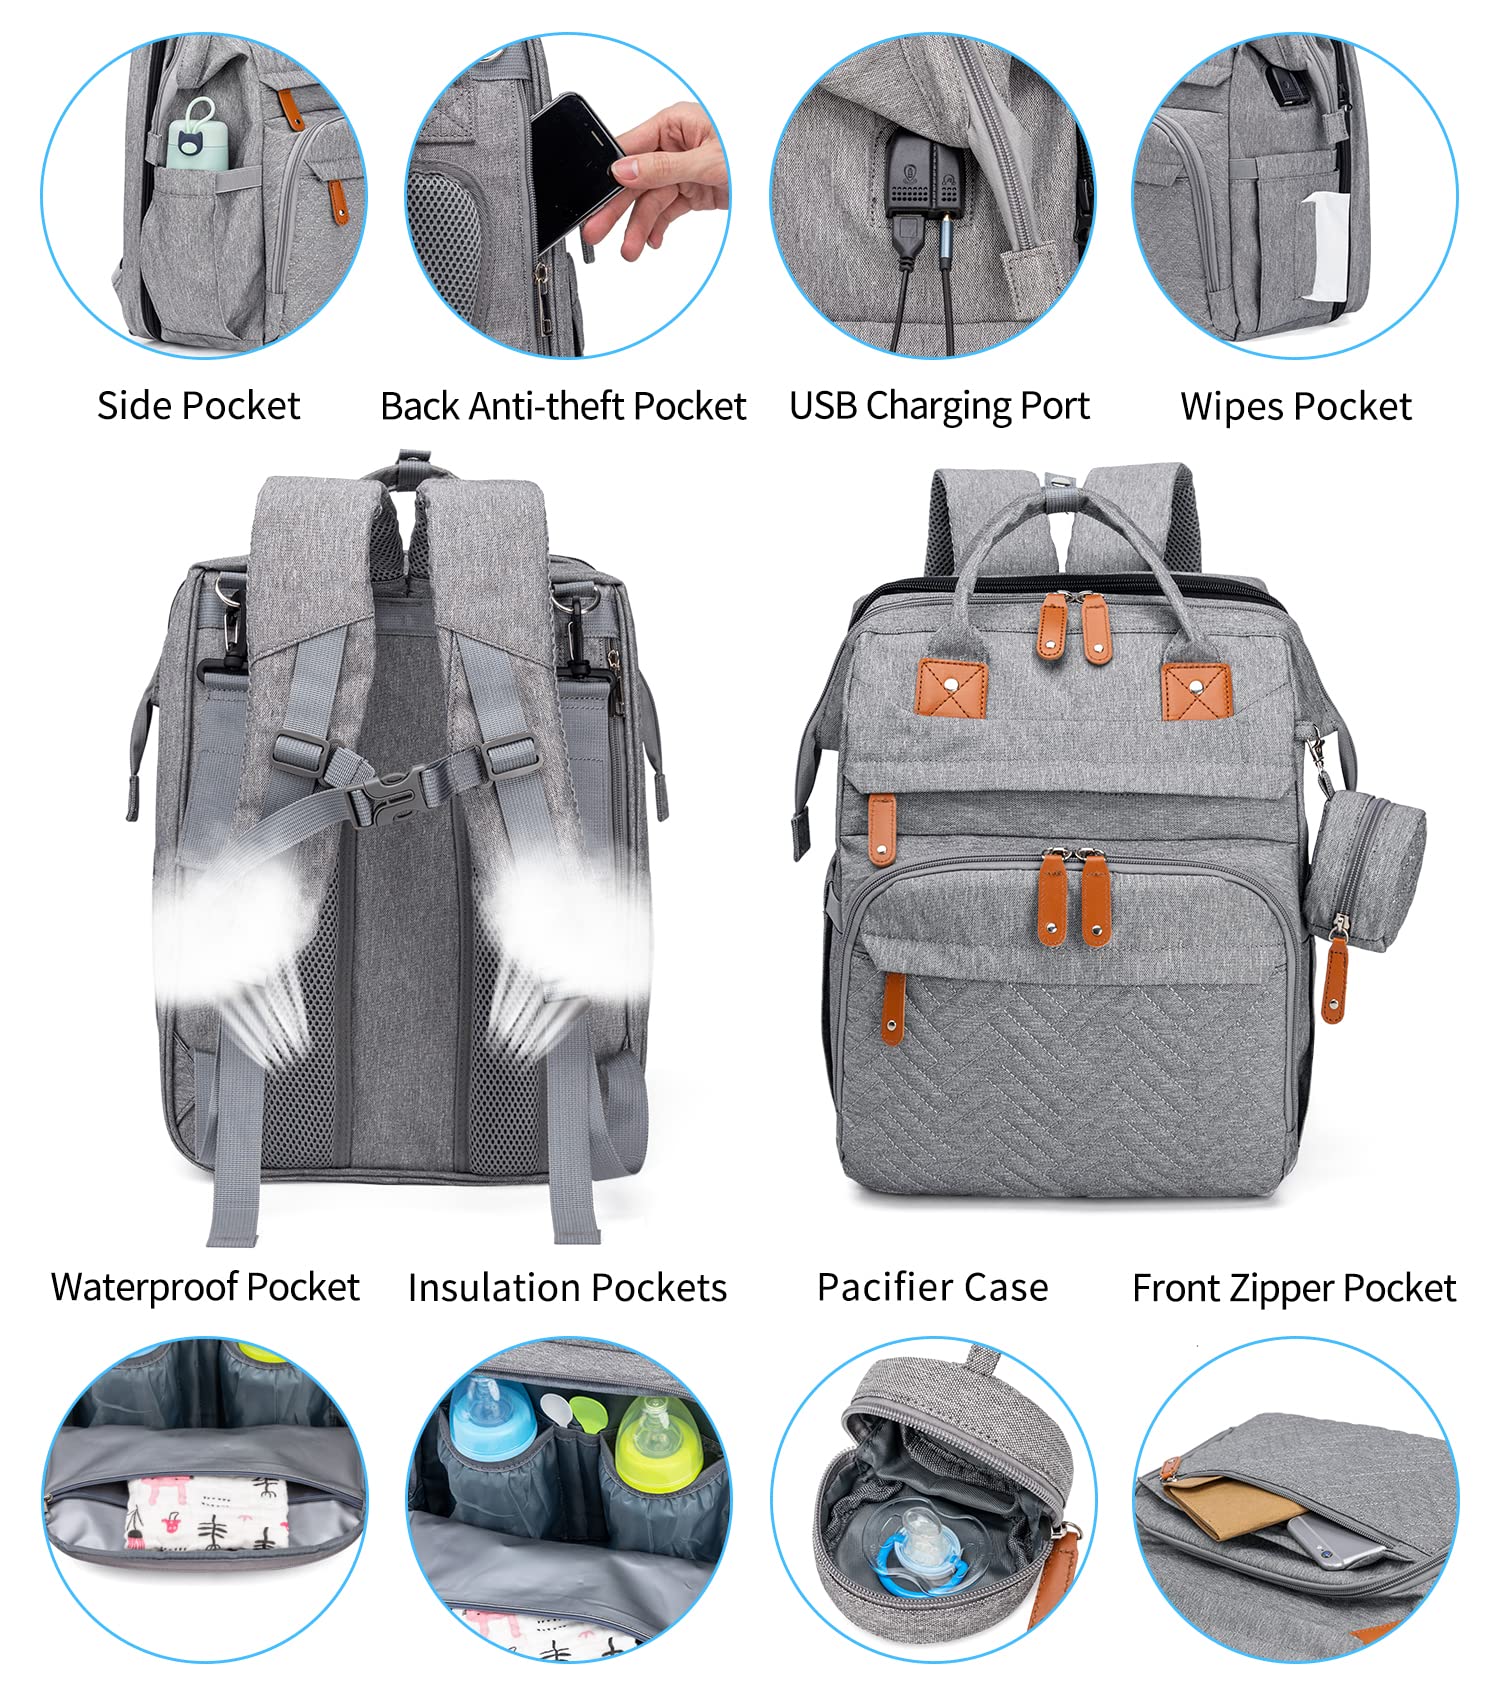 KABAQOO Baby Diaper Bag Backpack - Diaper Bag with Detachable Changing Station, Baby Bag for Boys & Girls - Newborn Baby Registry Search Baby Shower Gifts, Grey